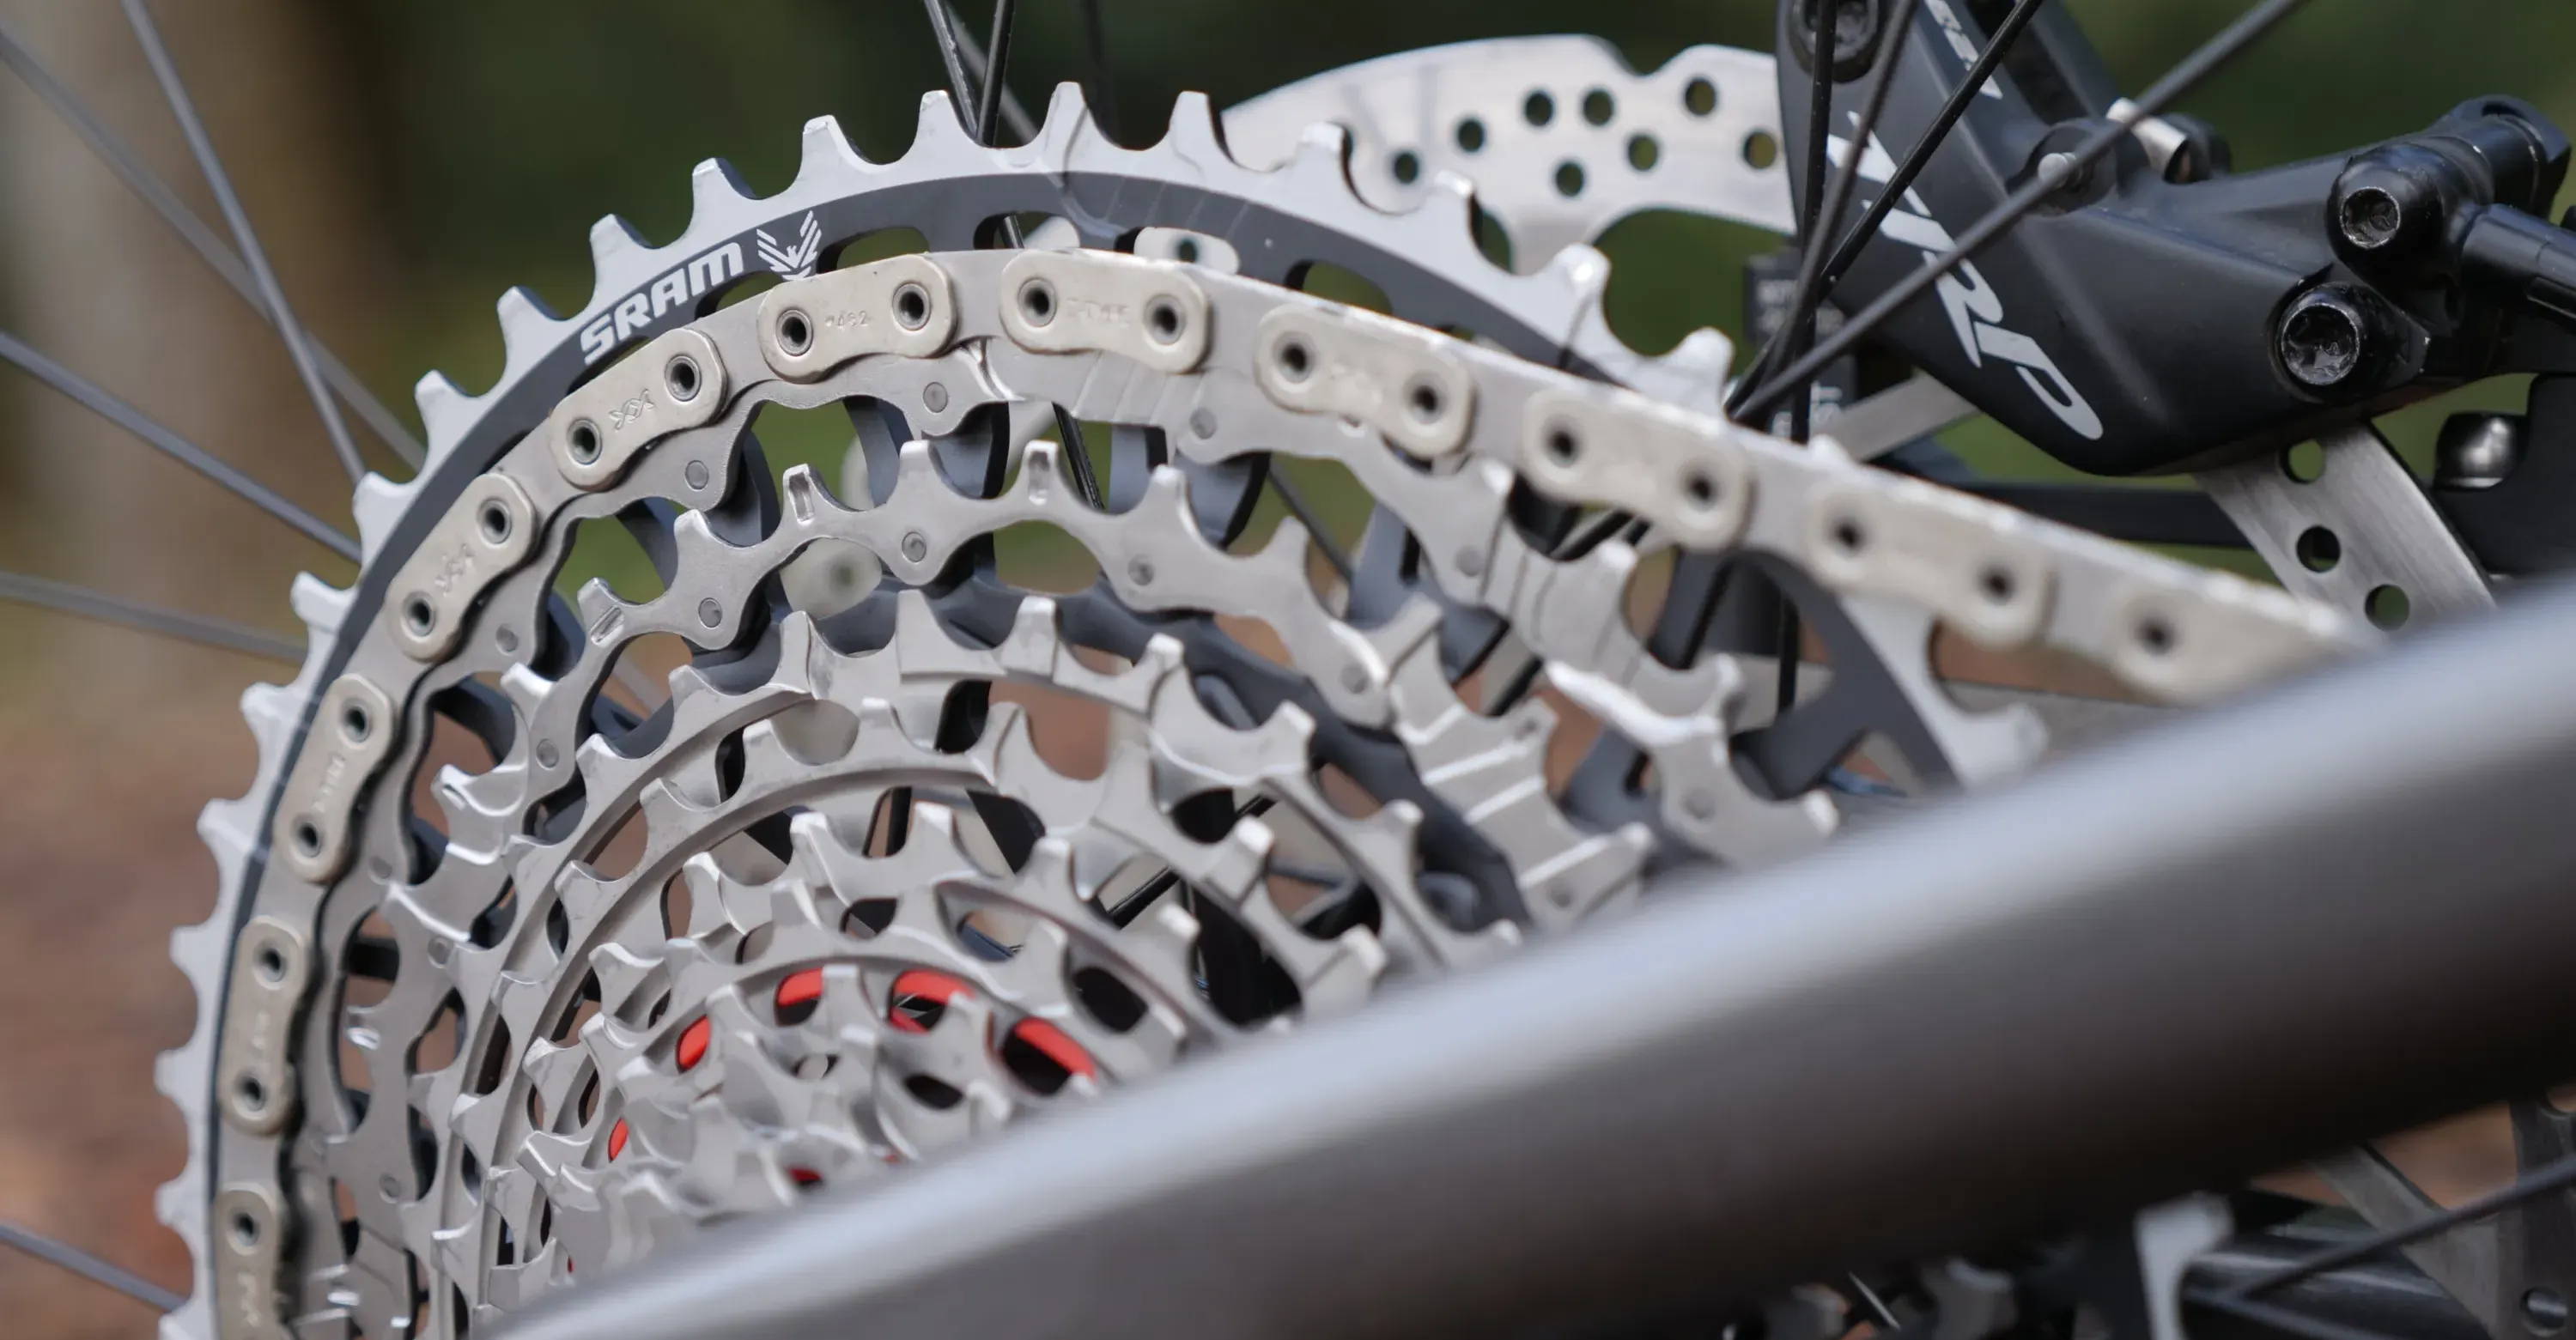 detail of sram xx eagle axs t-type transmission cassette https://thelostco.com/collections/groupsets/products/sram-xx-t-type-eagle-transmission-axs-groupset 